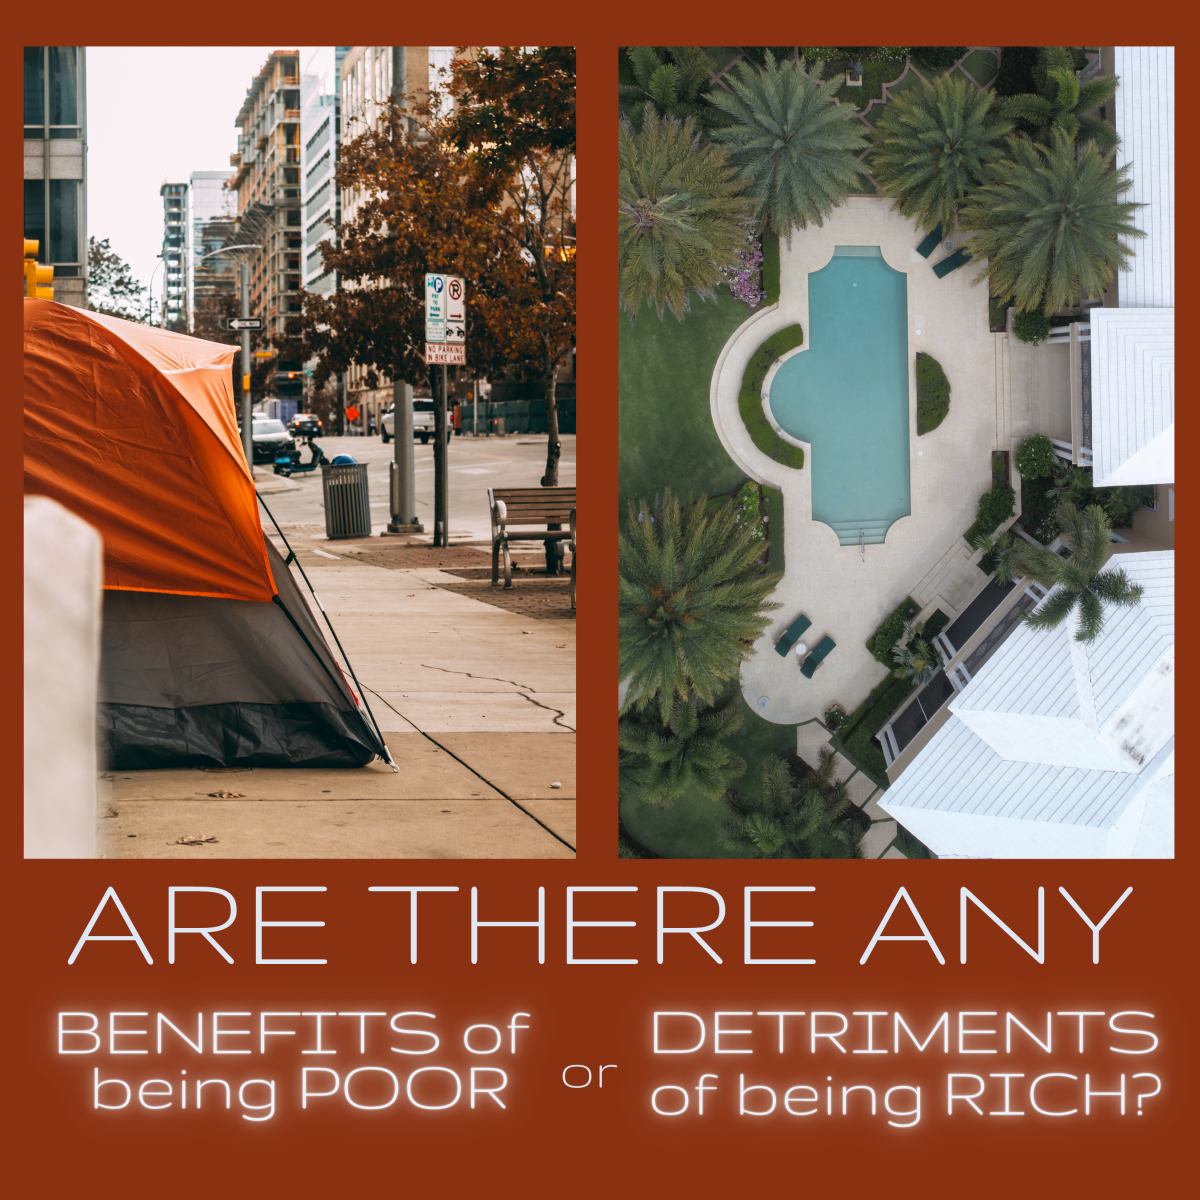 Are there any advantages of being poor... or disadvantages of being rich?  